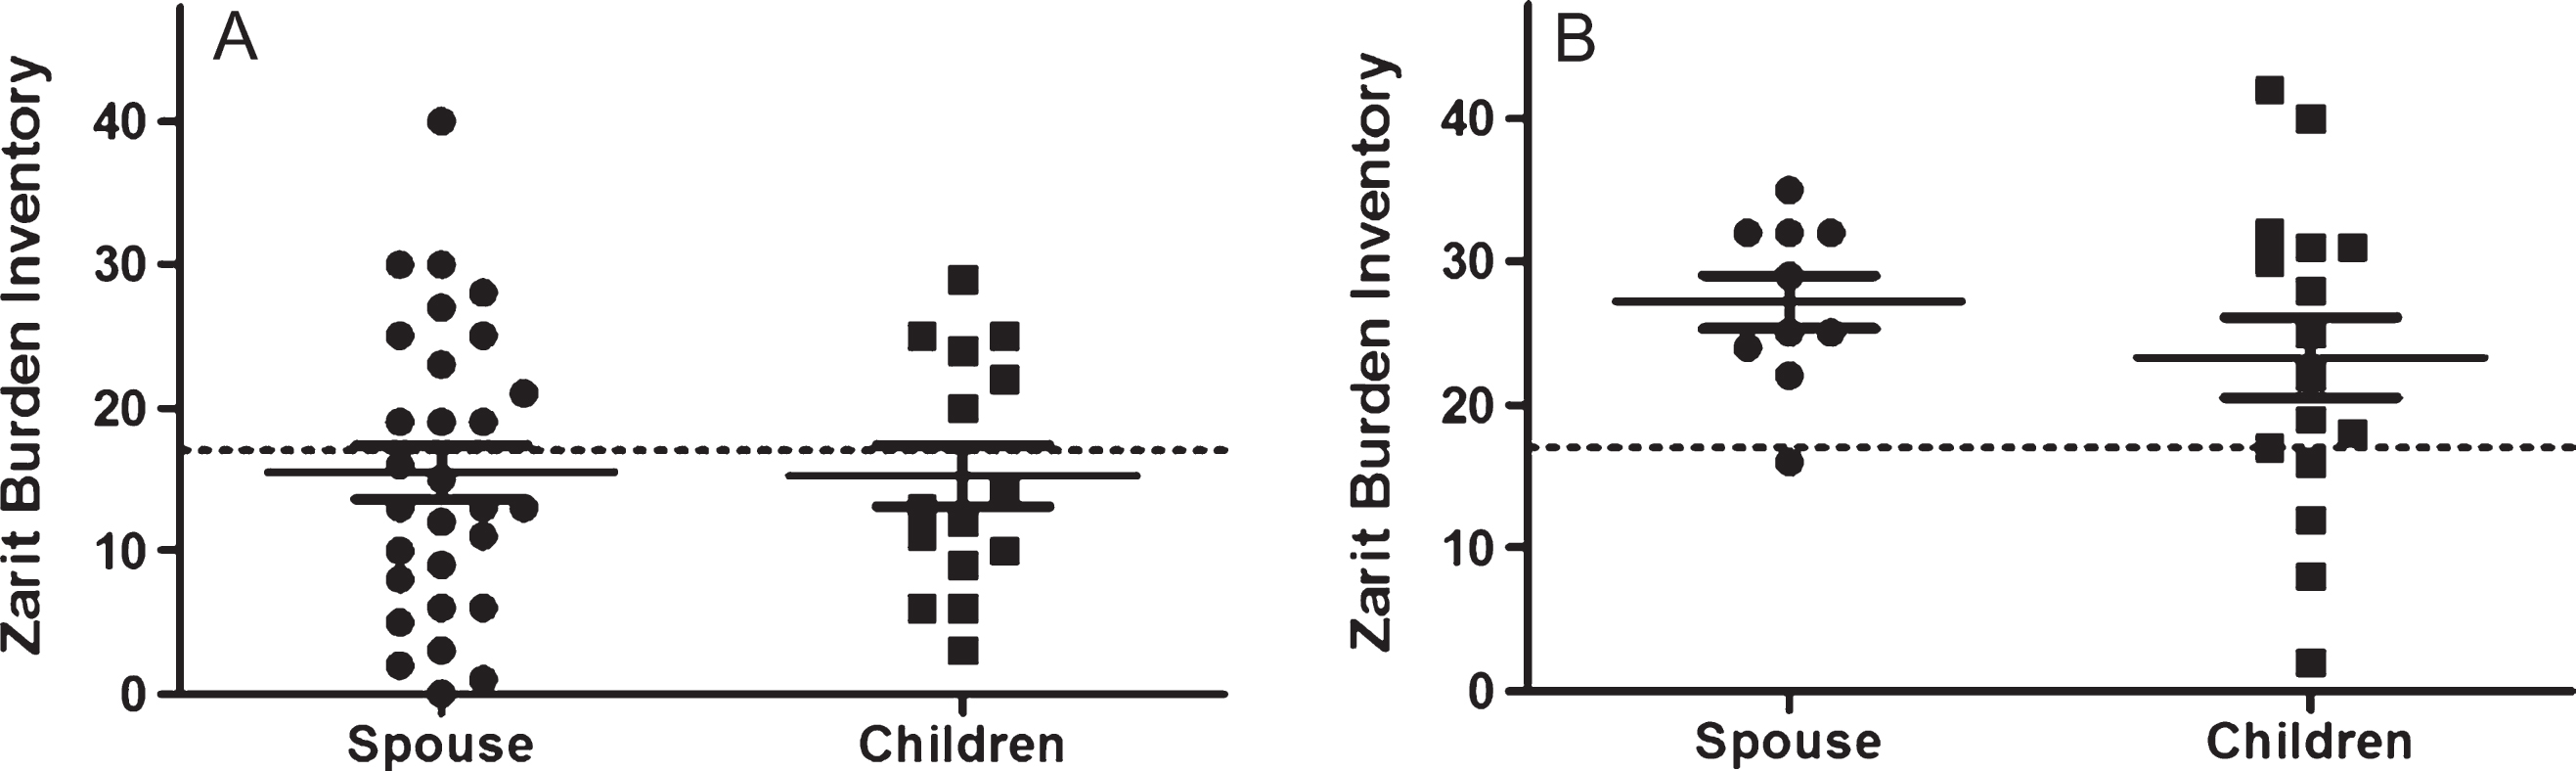 Distribution of burden scores (ZBI) in child carers and spousal carers, by dementia severity (FTD-FRS). A) Carers of Mild-Moderate FTD patients; B) Carers of Severe-Profound FTD patients ZBI, Zarit Burden Inventory; FTD-FRS, Frontotemporal Dementia Rating Scale; FTD, Frontotemporal Dementia; ■, Children; •, Spouse.